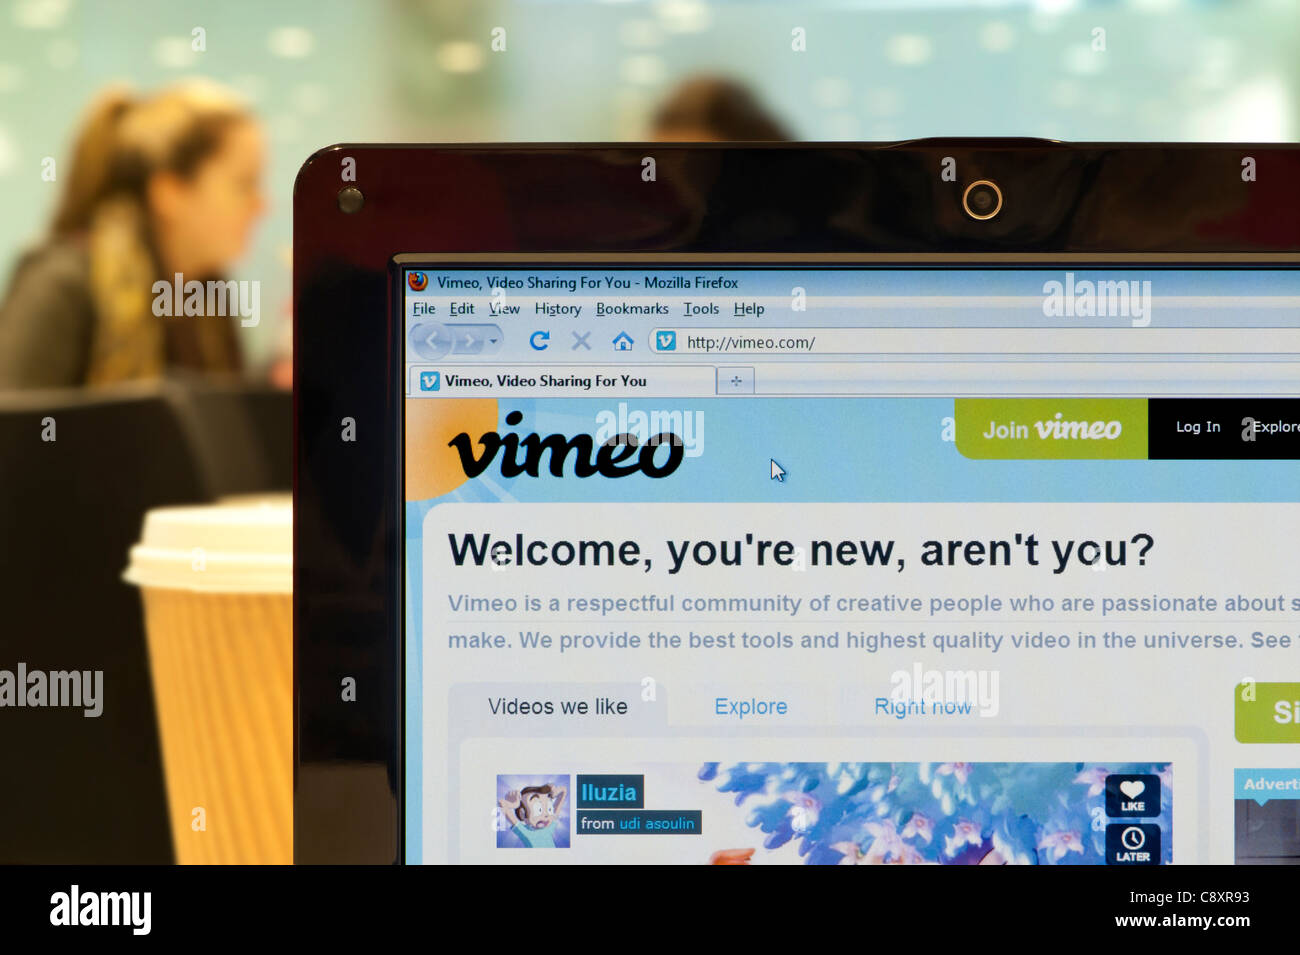 The Vimeo website shot in a coffee shop environment (Editorial use only: print, TV, e-book and editorial website). Stock Photo